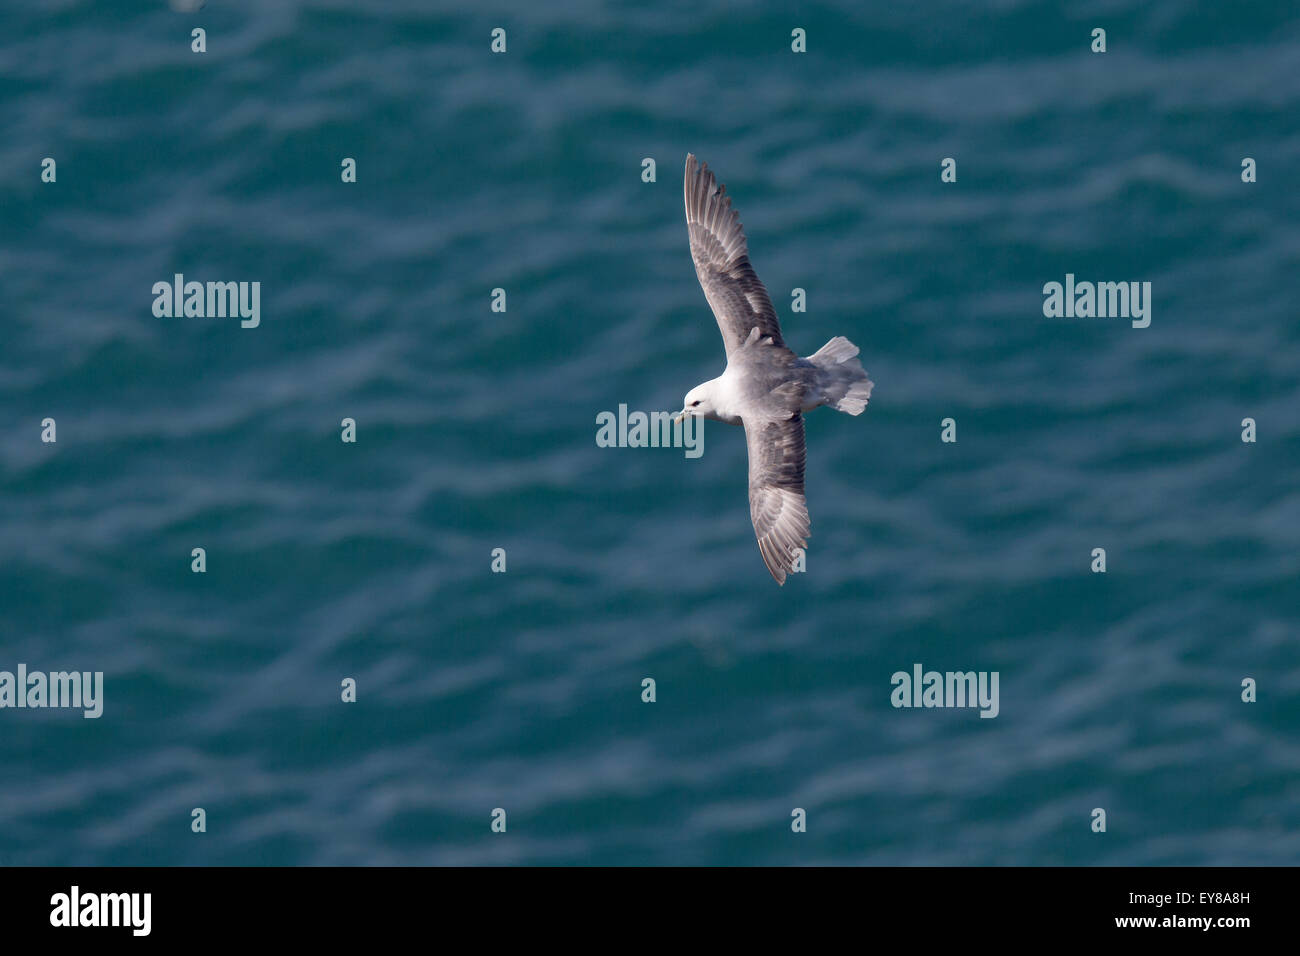 Looking down on a Northern Fulmar (Fulmarus glacialis) in flight over the sea, Lands End, Cornwall, England, UK. Stock Photo